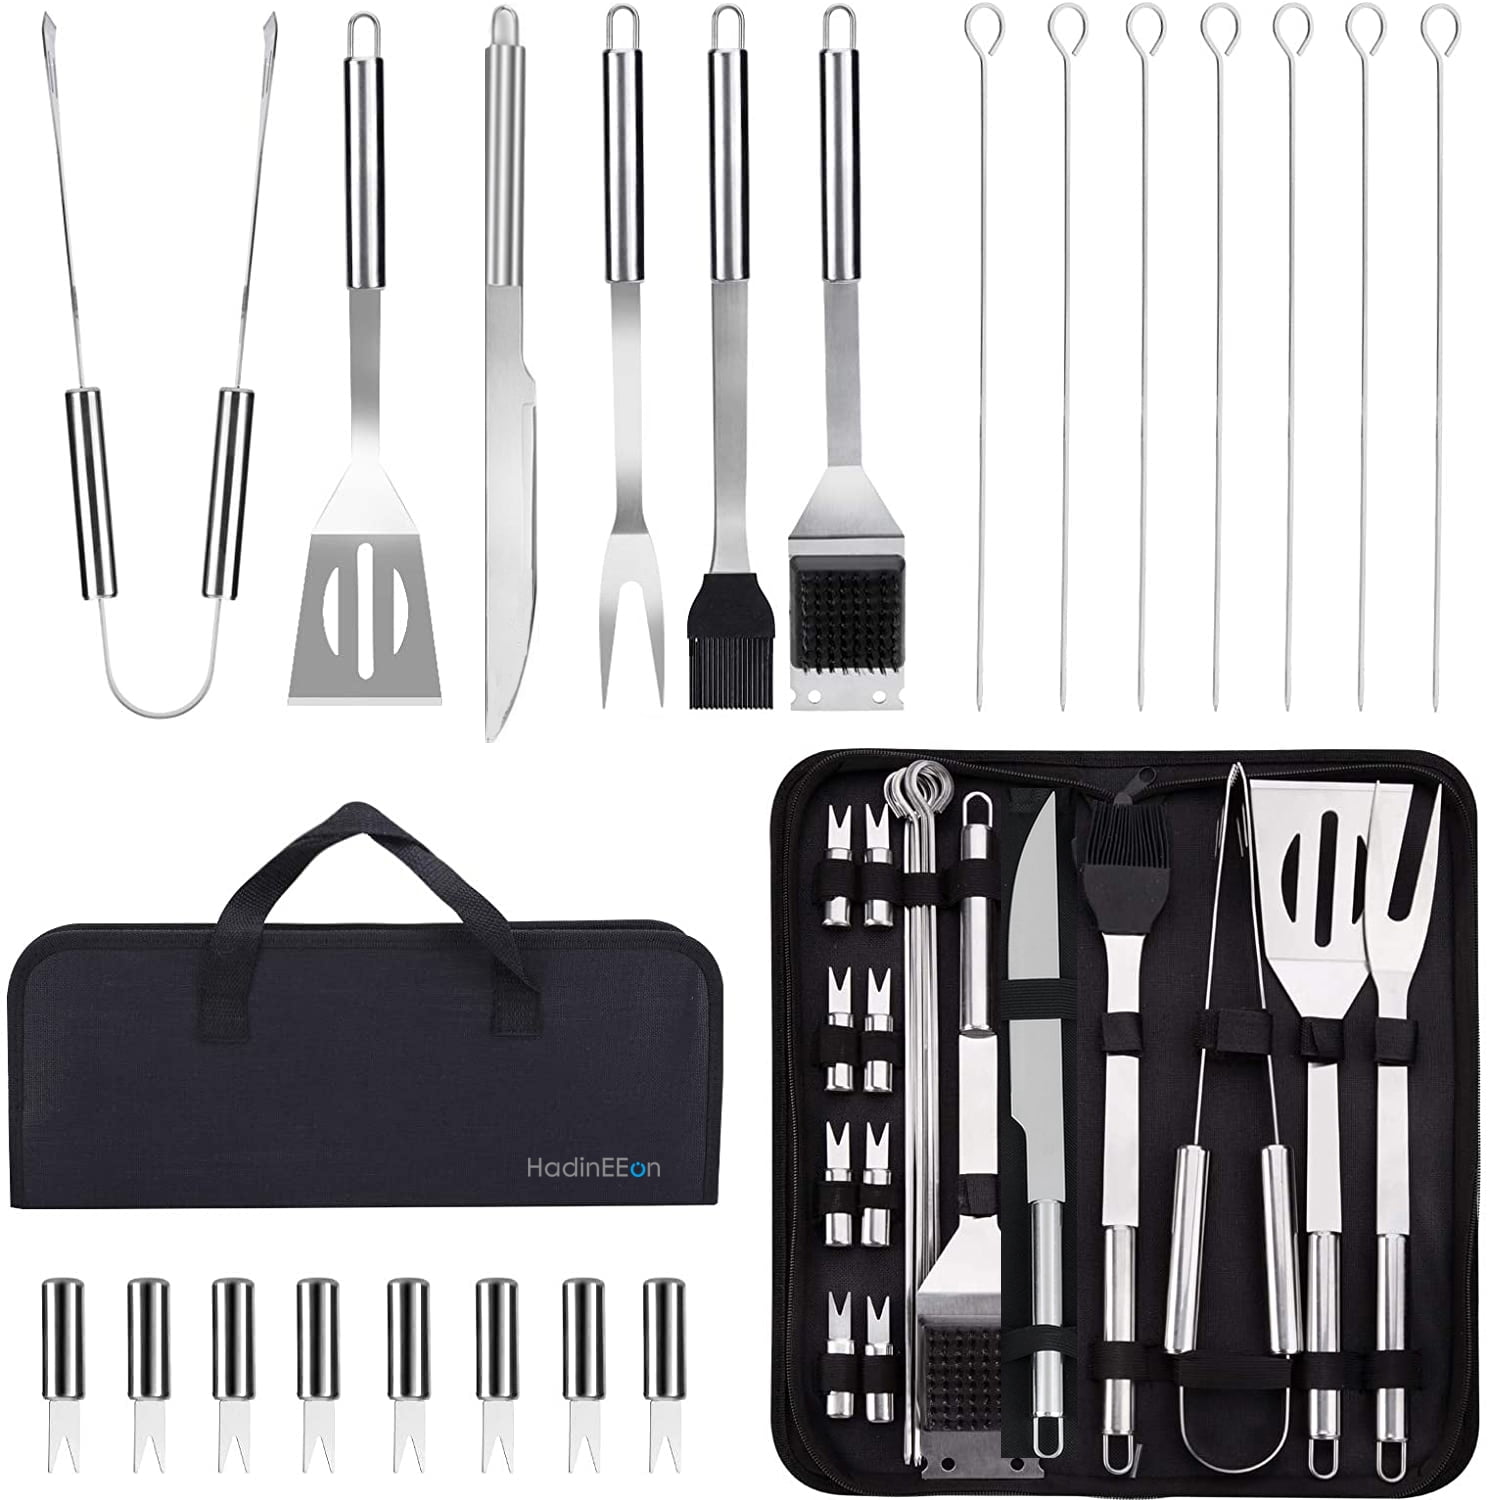 BBQ Grill Accessories,41PCS BBQ Tool Set, ExtraThick Stainless Steel Barbecue  Utensils Cleaning Brush,Shovel Fork BBQ Accessories With Storage Bag for  Camping Birthday Party on the Best bbq Set Gift 